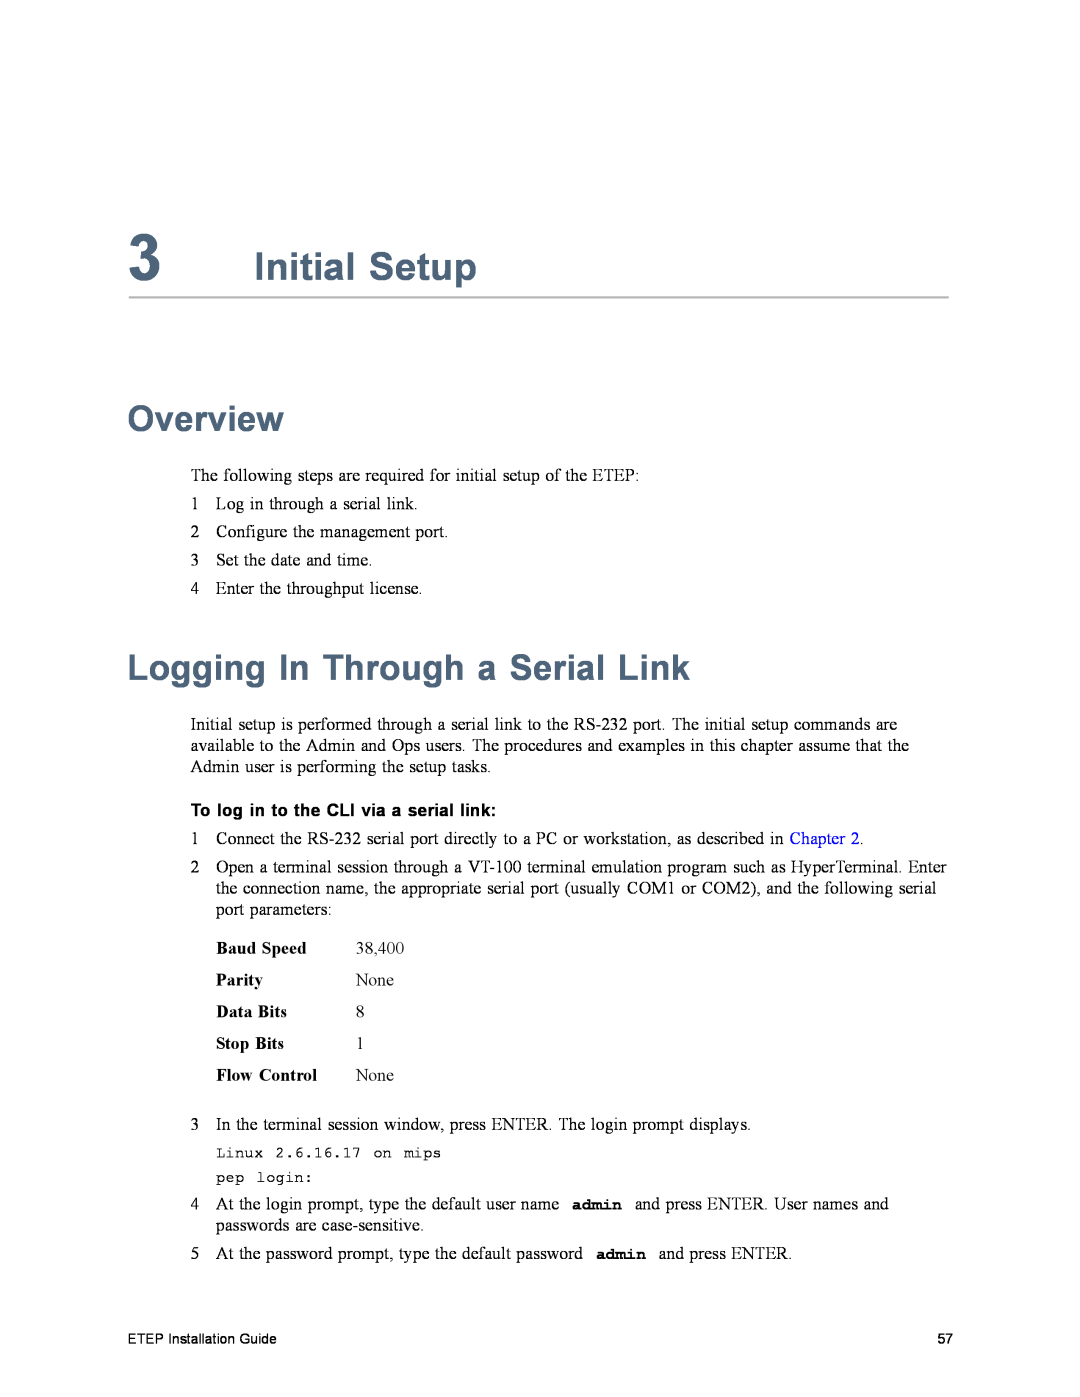 Black Box ET0100A Initial Setup, Overview, Logging In Through a Serial Link, To log in to the CLI via a serial link, None 